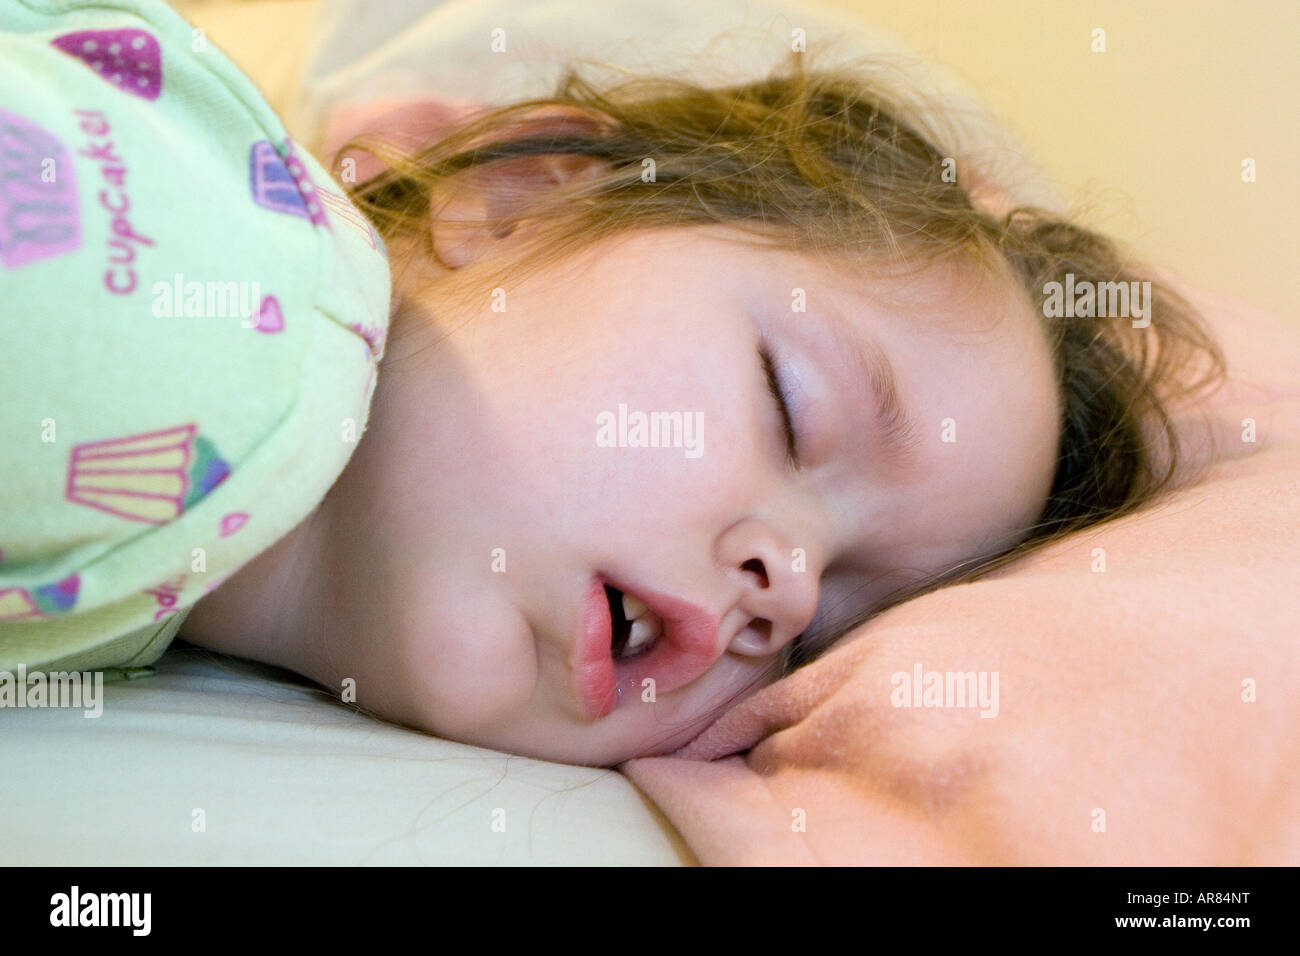 Young girl age 4 fast asleep with mouth wide open on pillow. The day after Christmas requires extra sleep Stock Photo